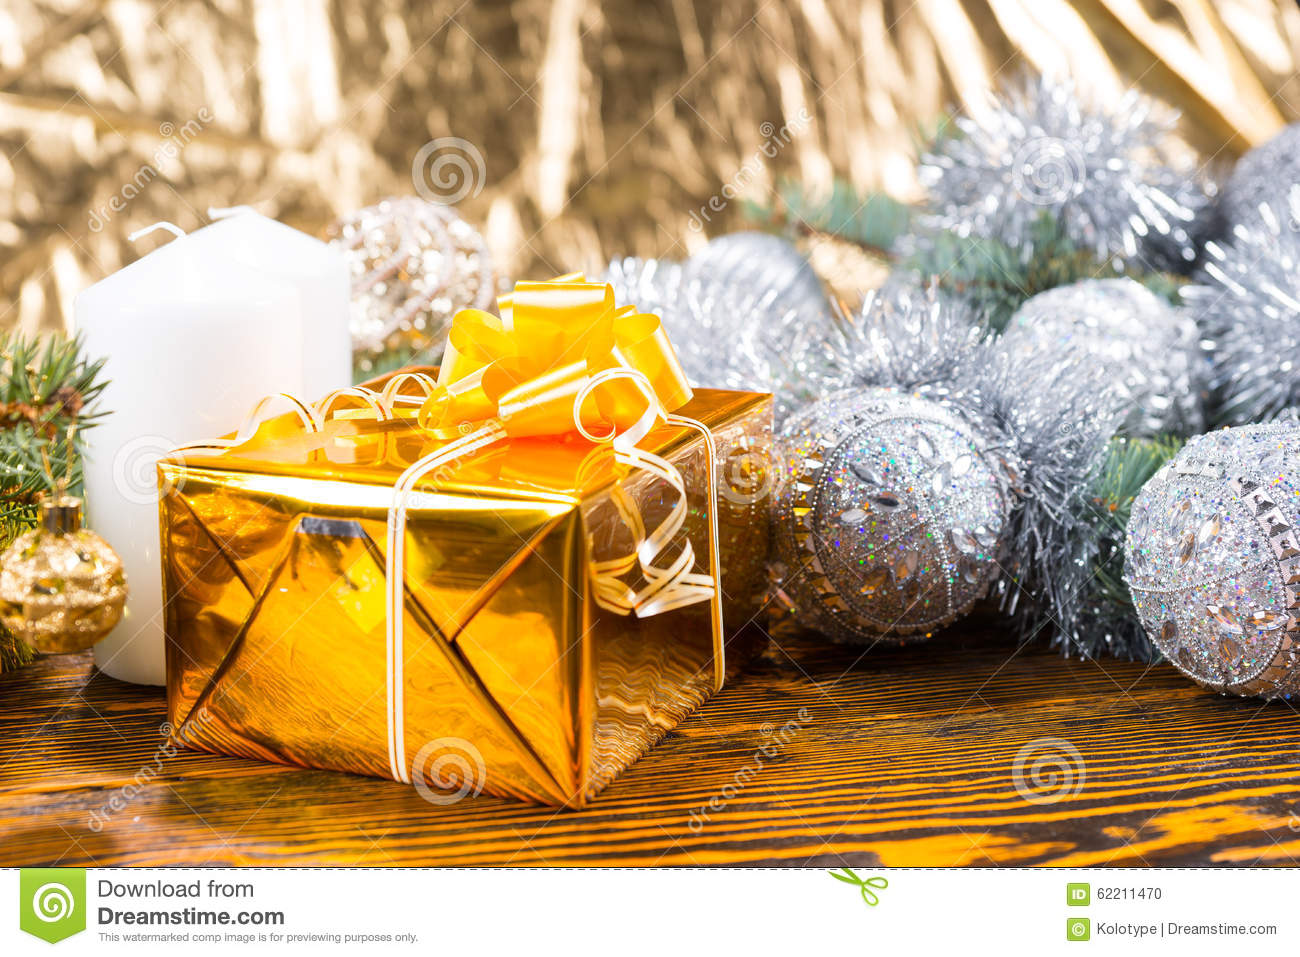 Of Christmas Gift Wrapped In Gold On Rustic Wooden Table With Candle